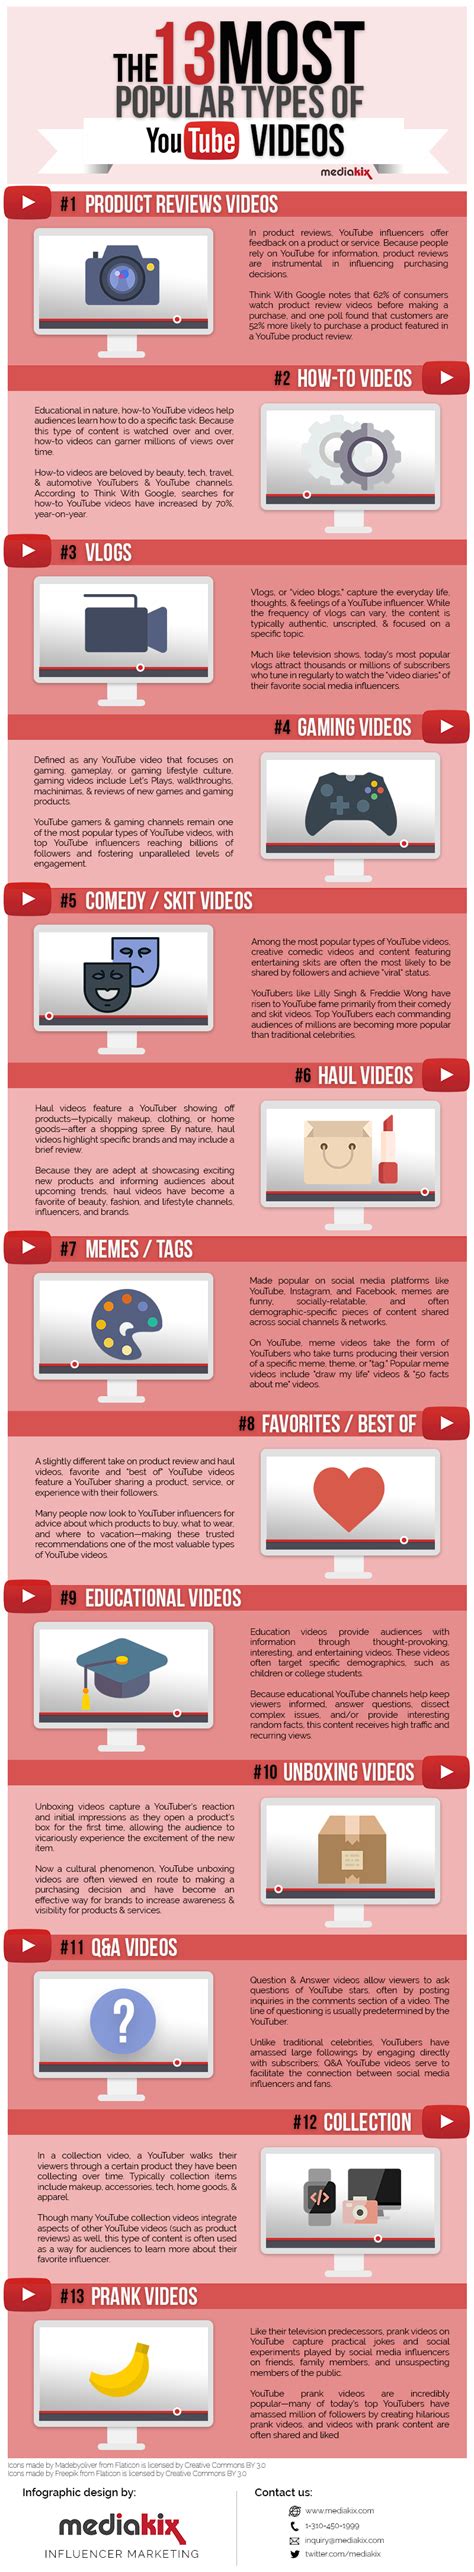 The Most Popular Types Of Videos On Youtube Infographic David L